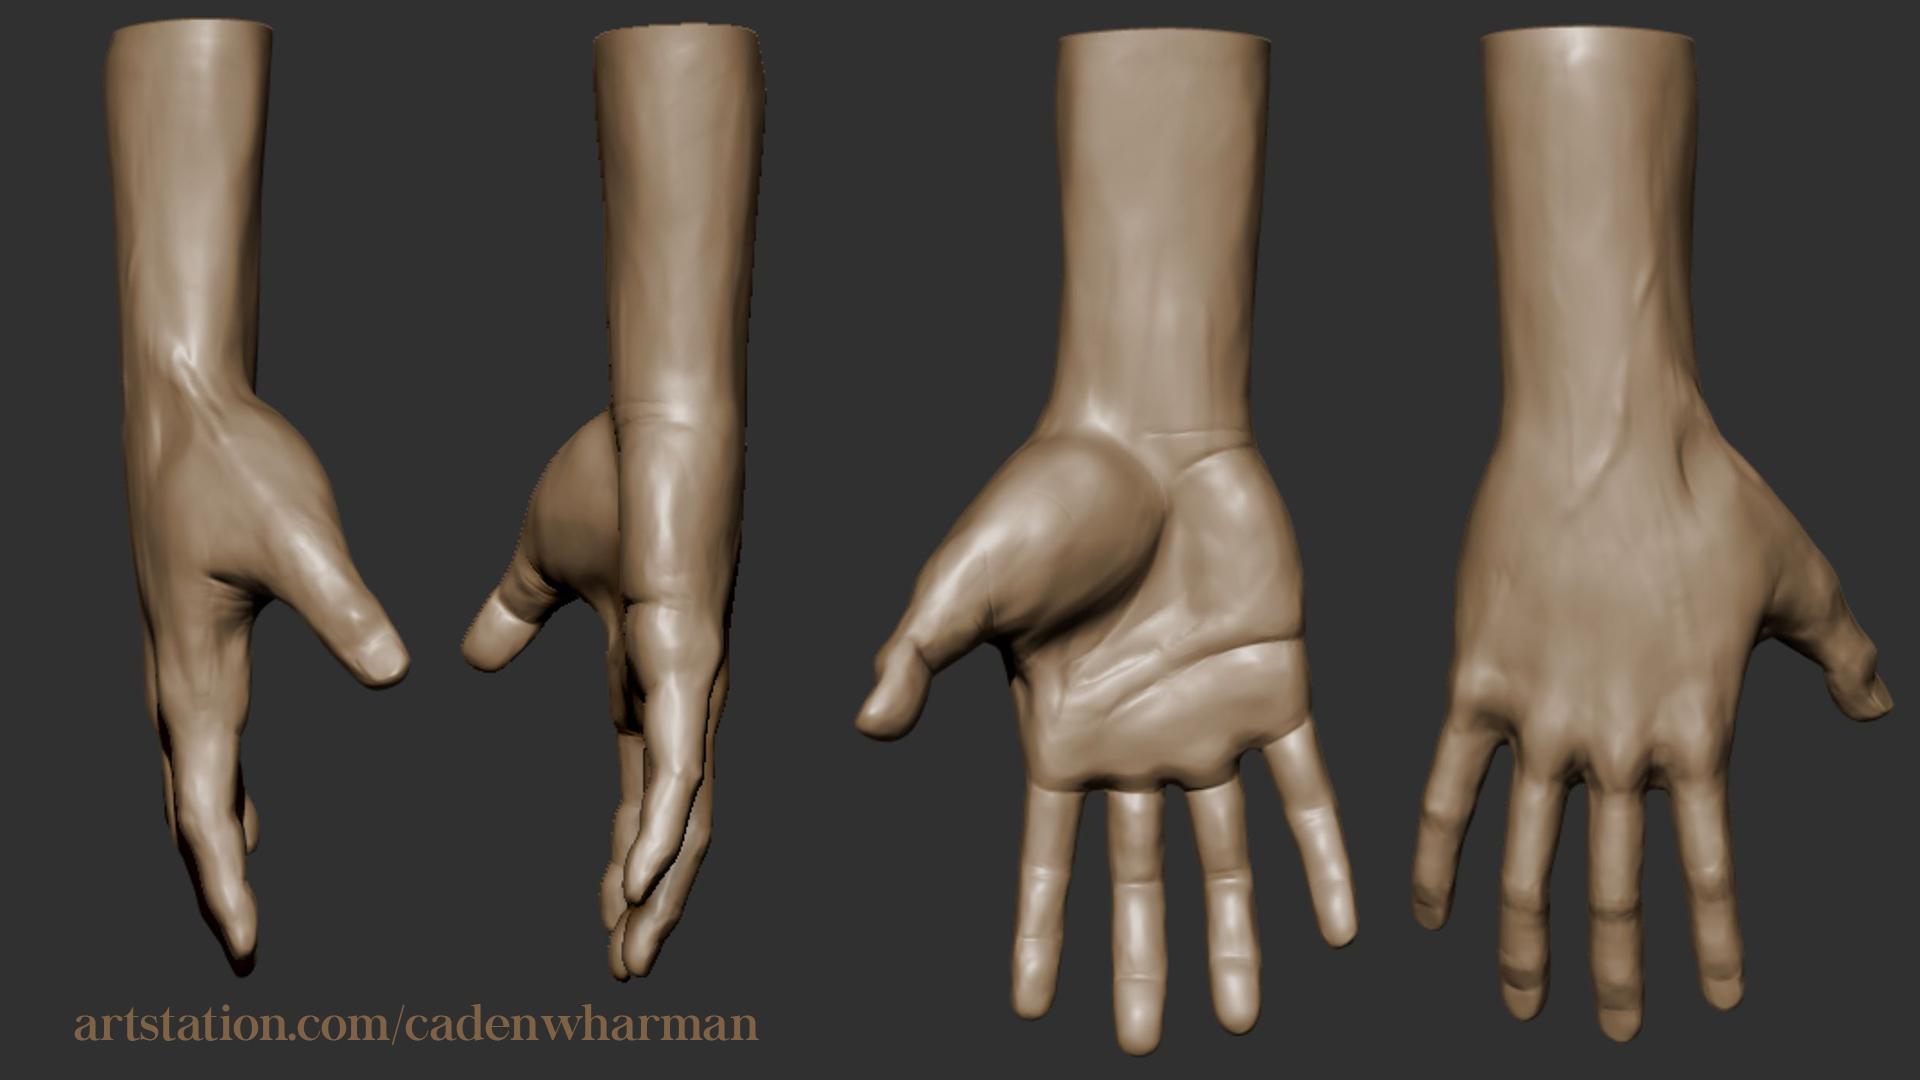 3D sculpted hand from multiple points of view by Caden Harman